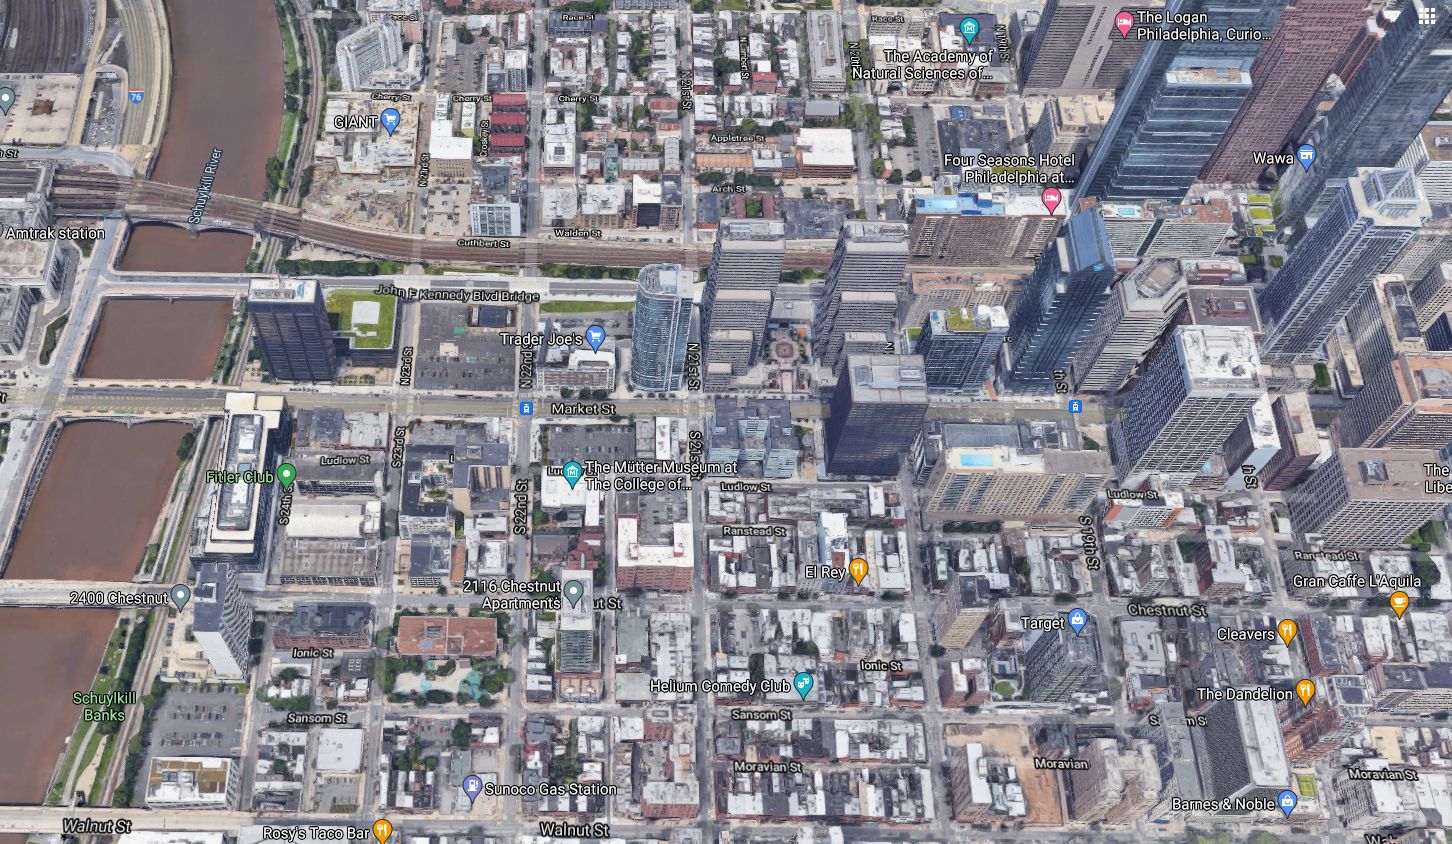 Center City West. Looking north. Credit: Google Maps